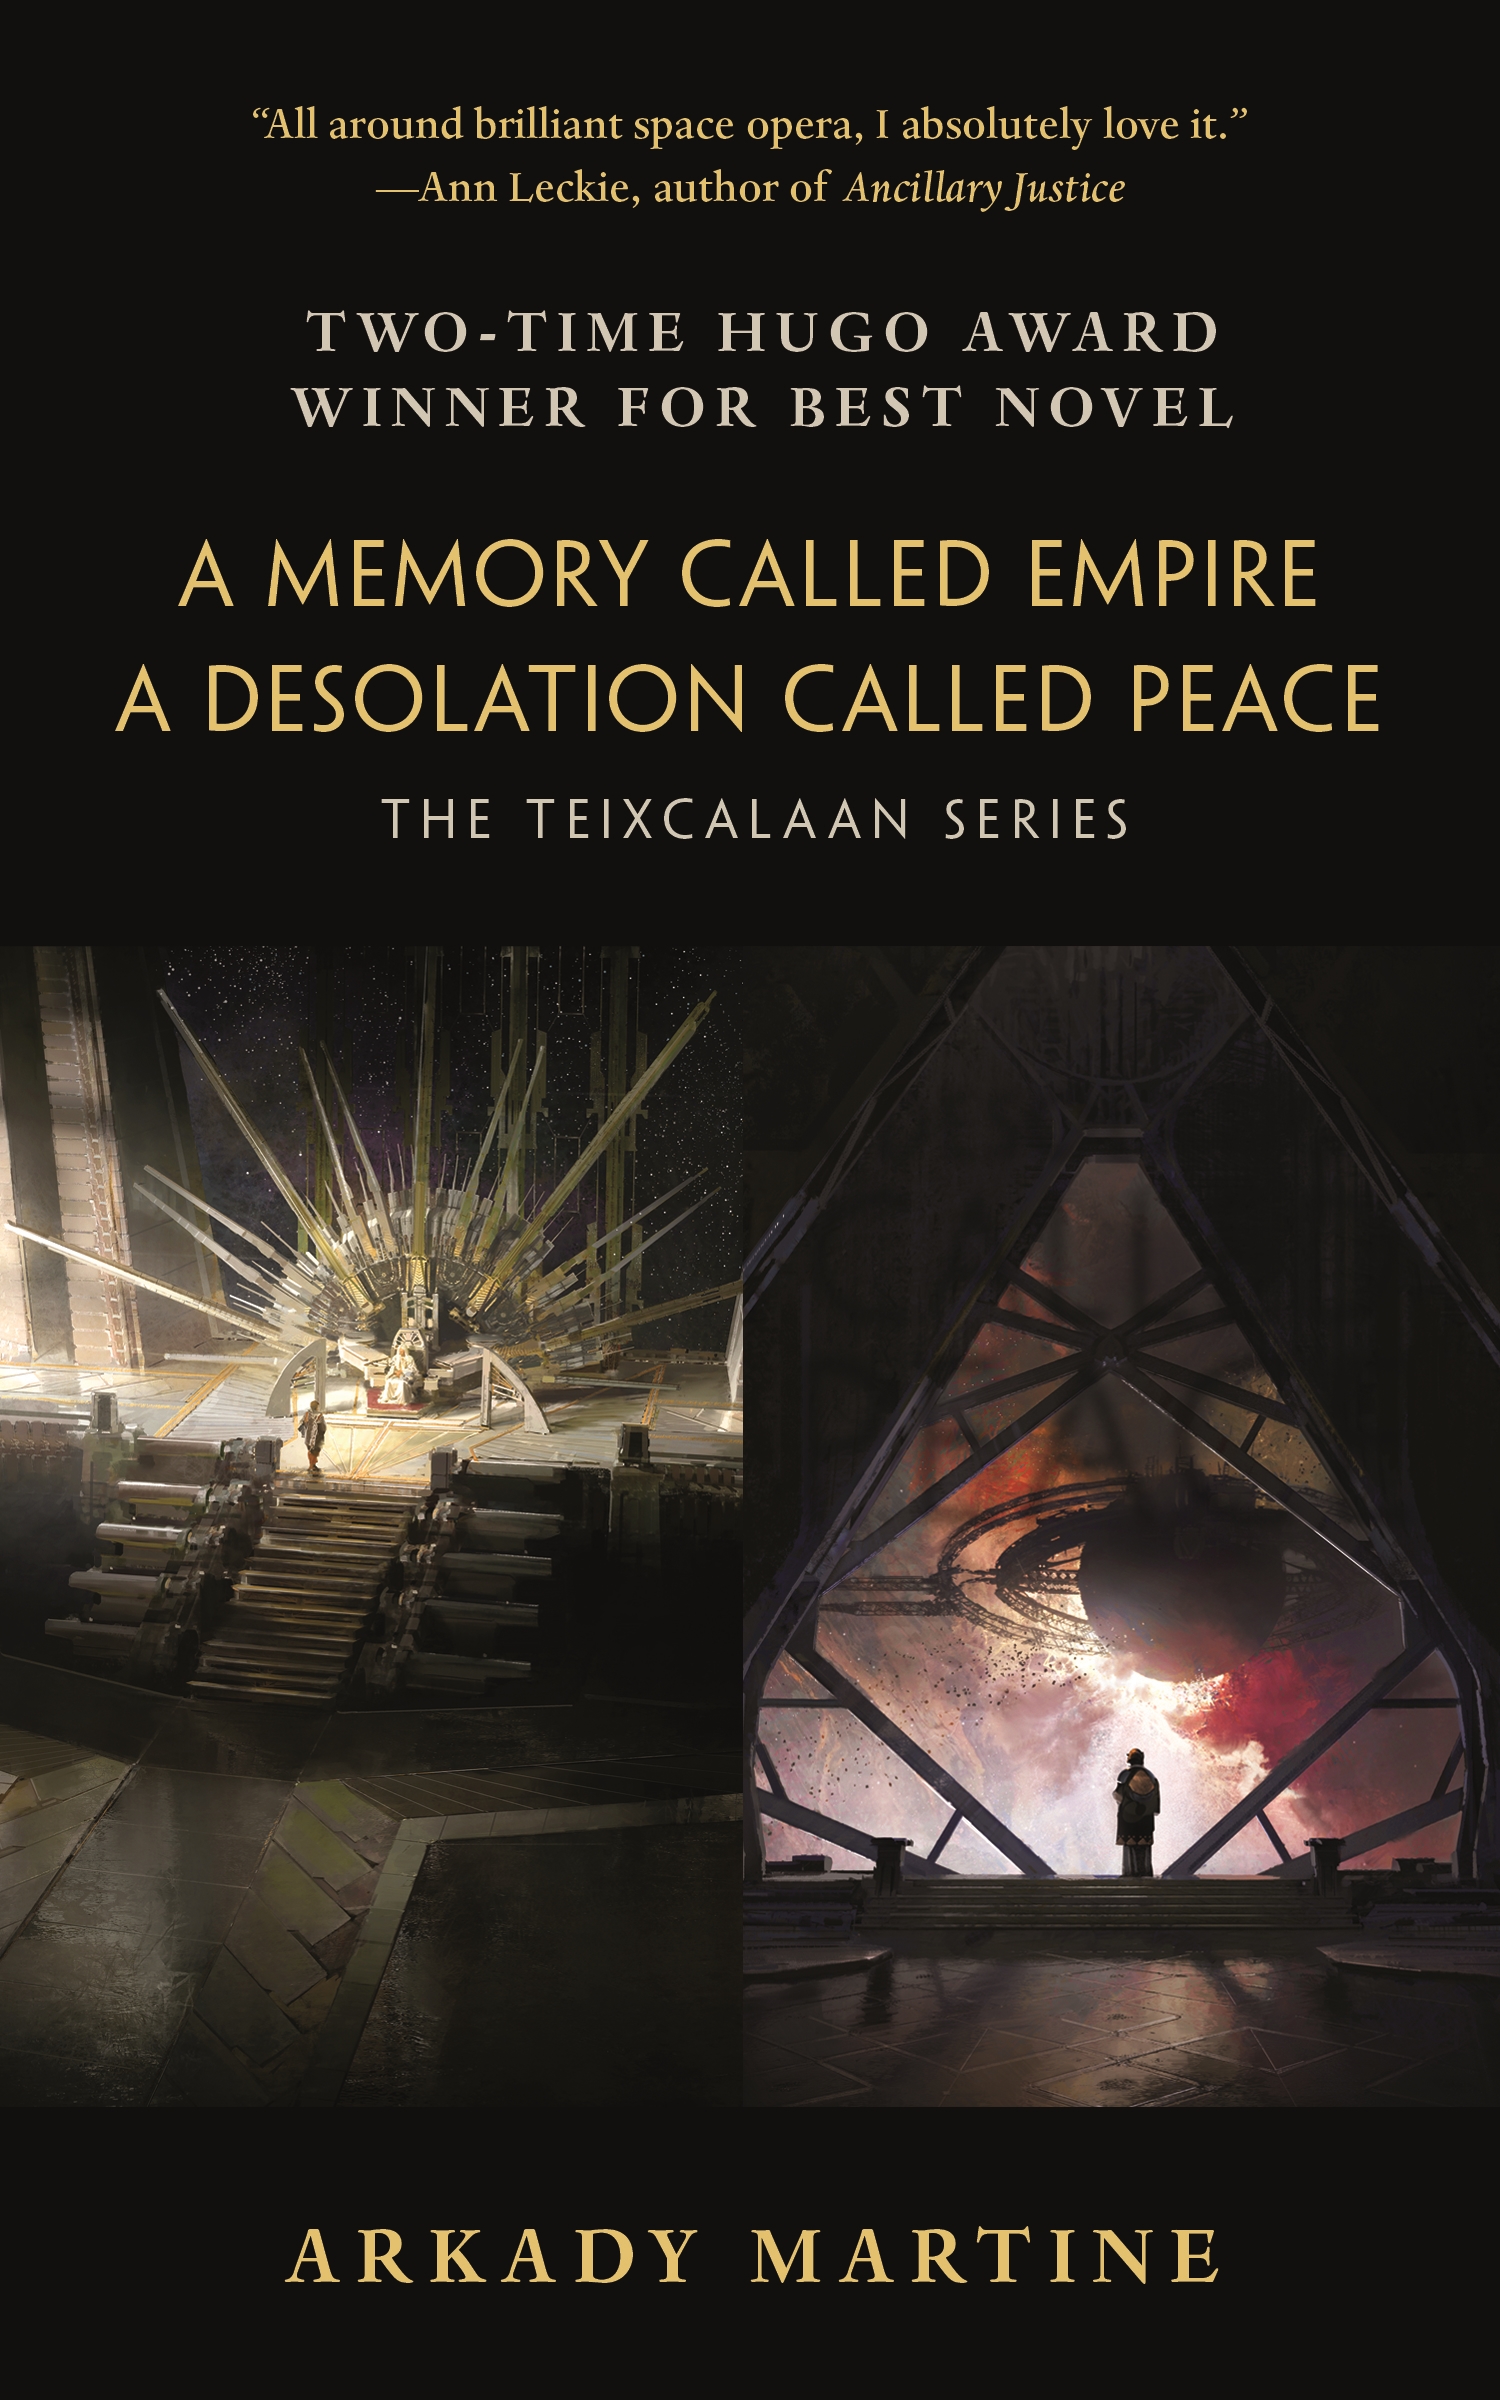 A Memory Called Empire and A Desolation Called Peace : The Teixcalaan Series by Arkady Martine